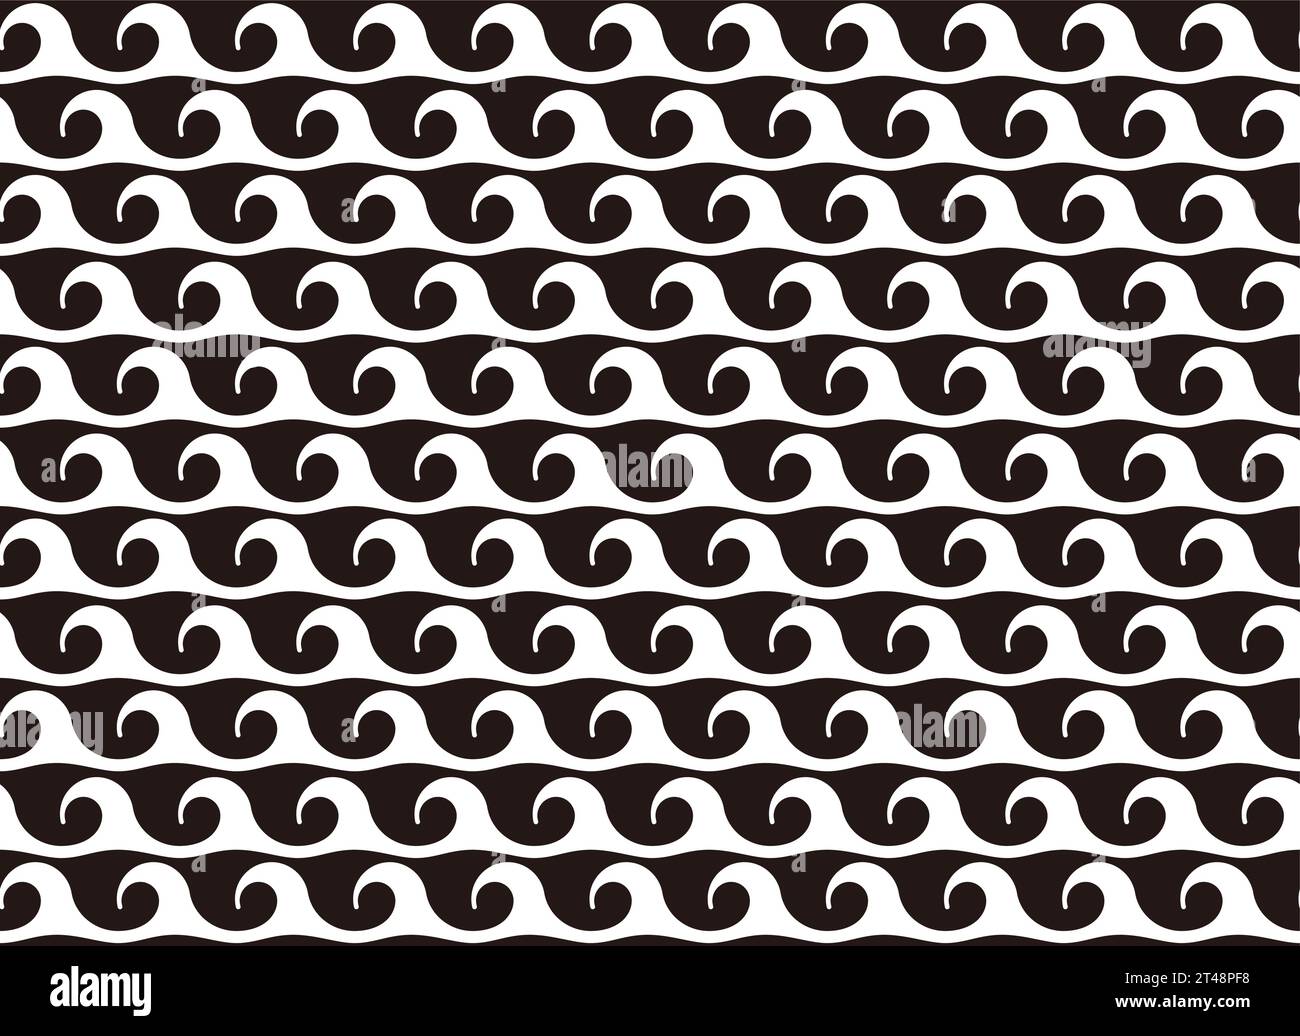 Horizontally And Vertically Repeatable Monochrome Seamless Japanese Vintage Pattern On A White Background. Vector Illustration. Stock Vector